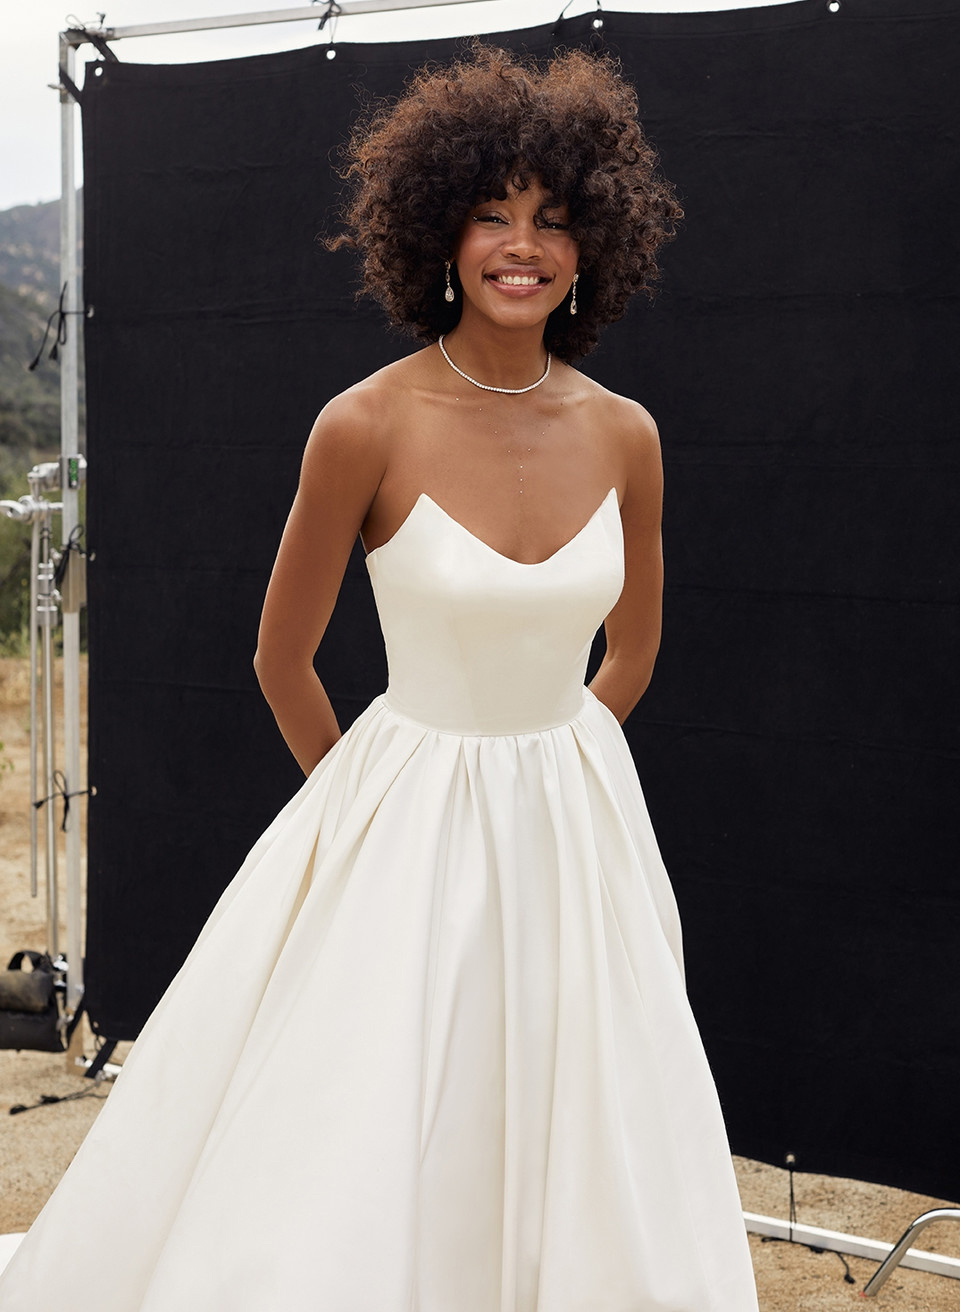 Strapless  Ball-Gown Wedding Dresses With Satin